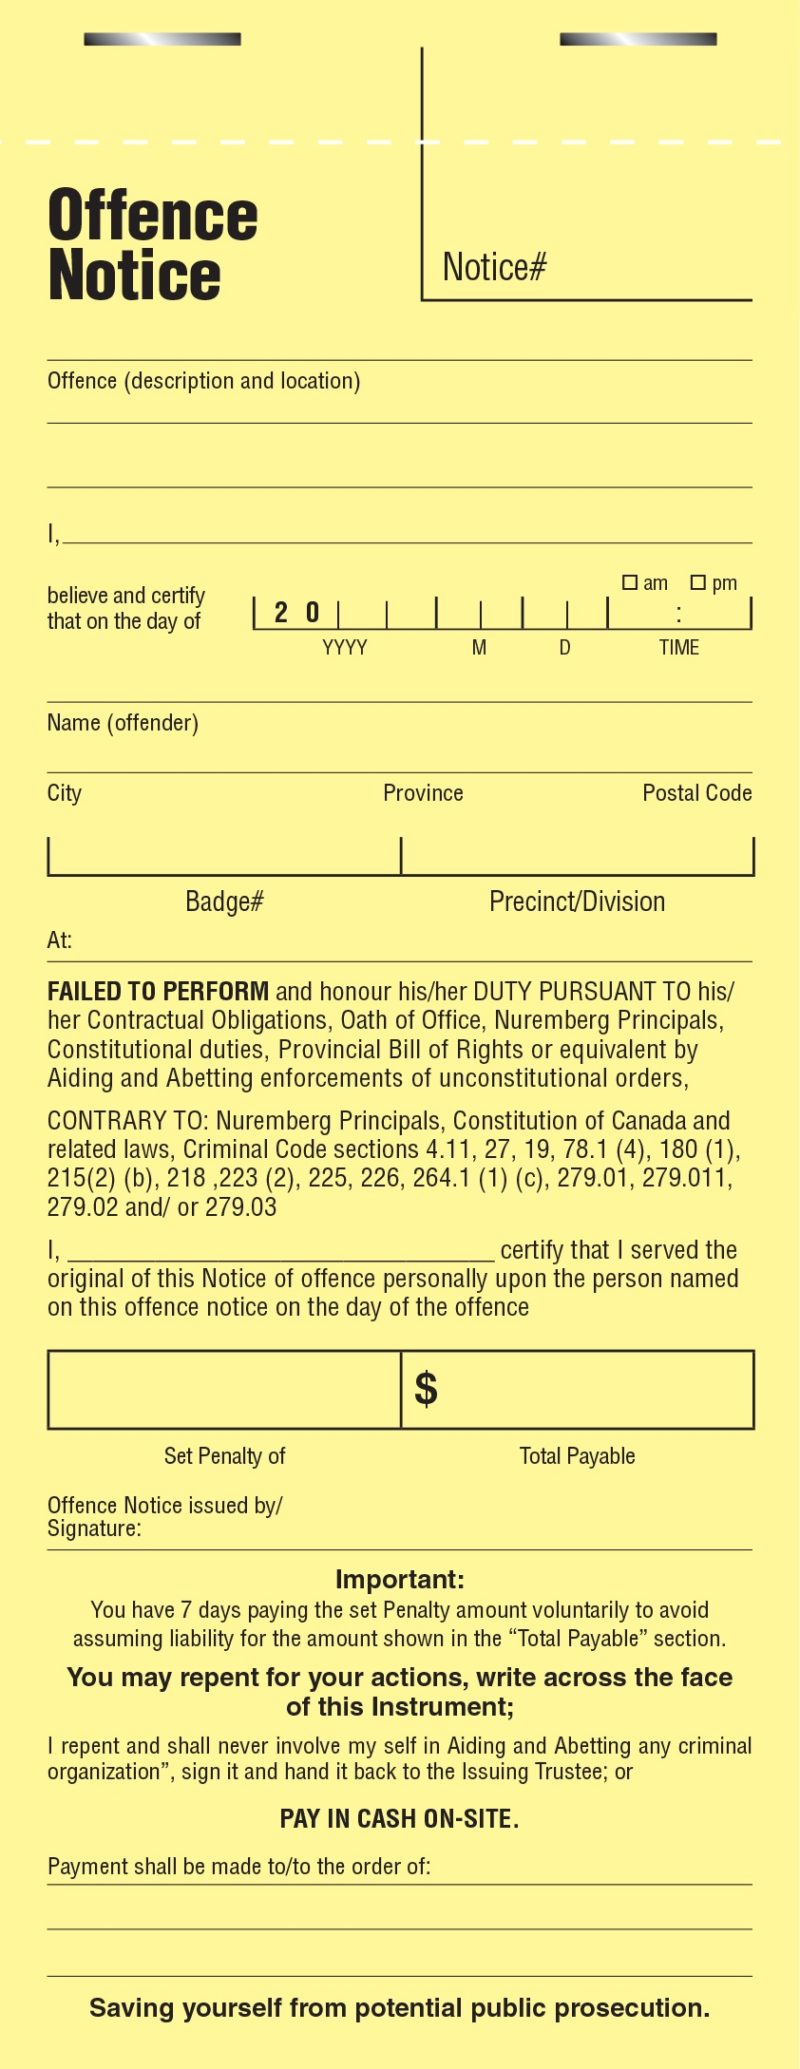 101-ticket-book-for-by-law-police-stores-and-others-take-action-canada